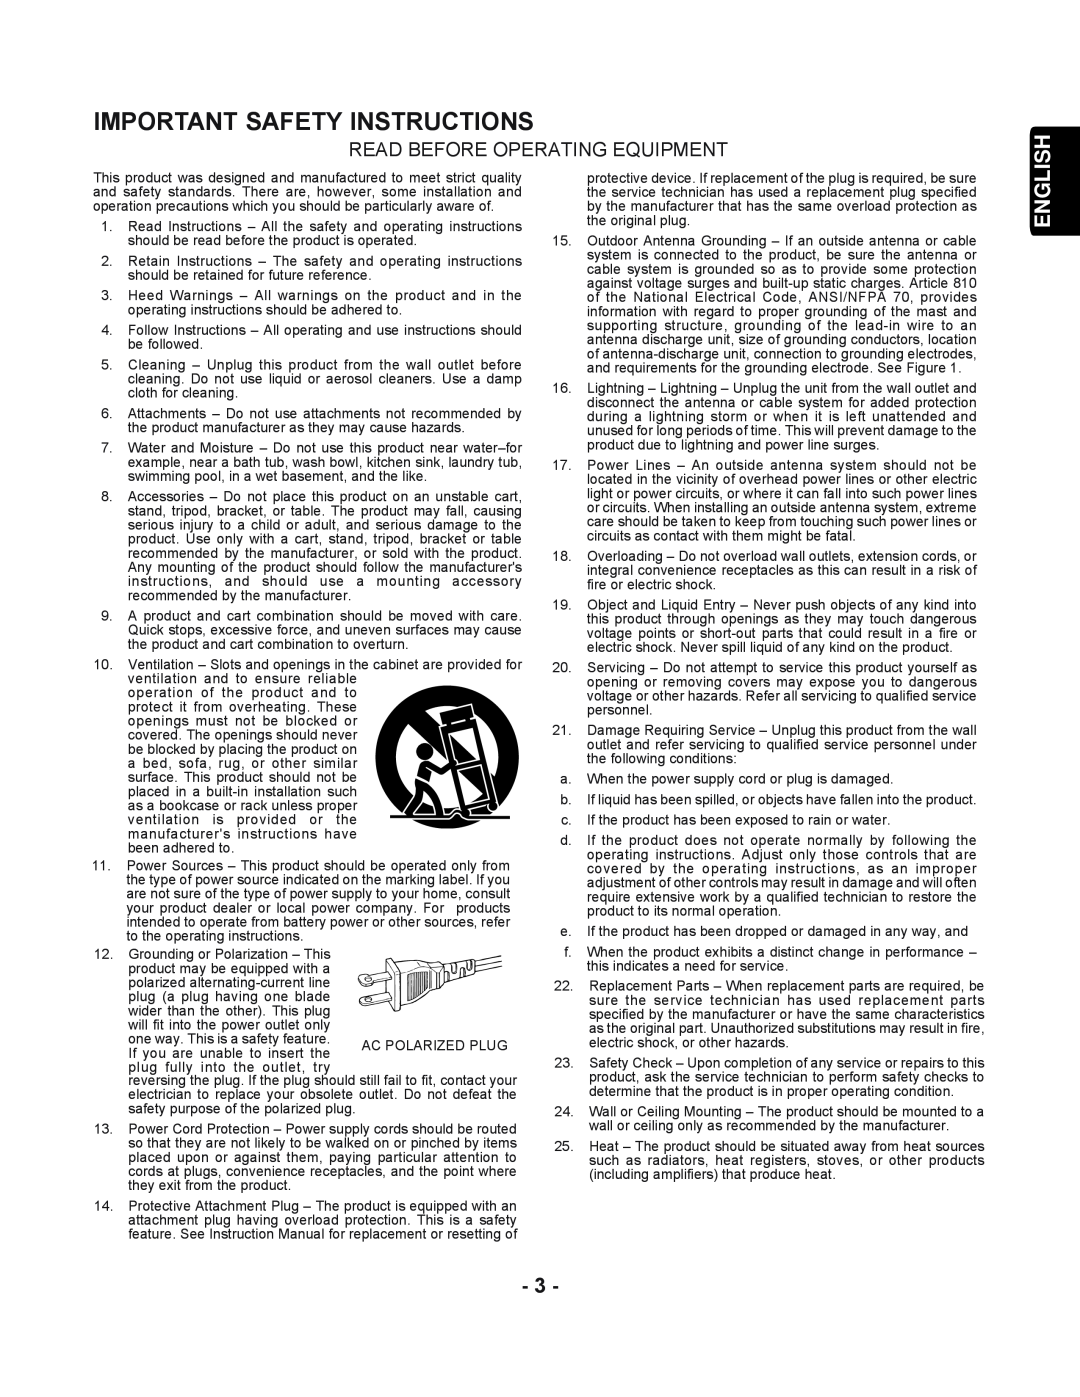 Marantz PMD351 manual Important Safety Instructions, Read Before Operating Equipment, English 